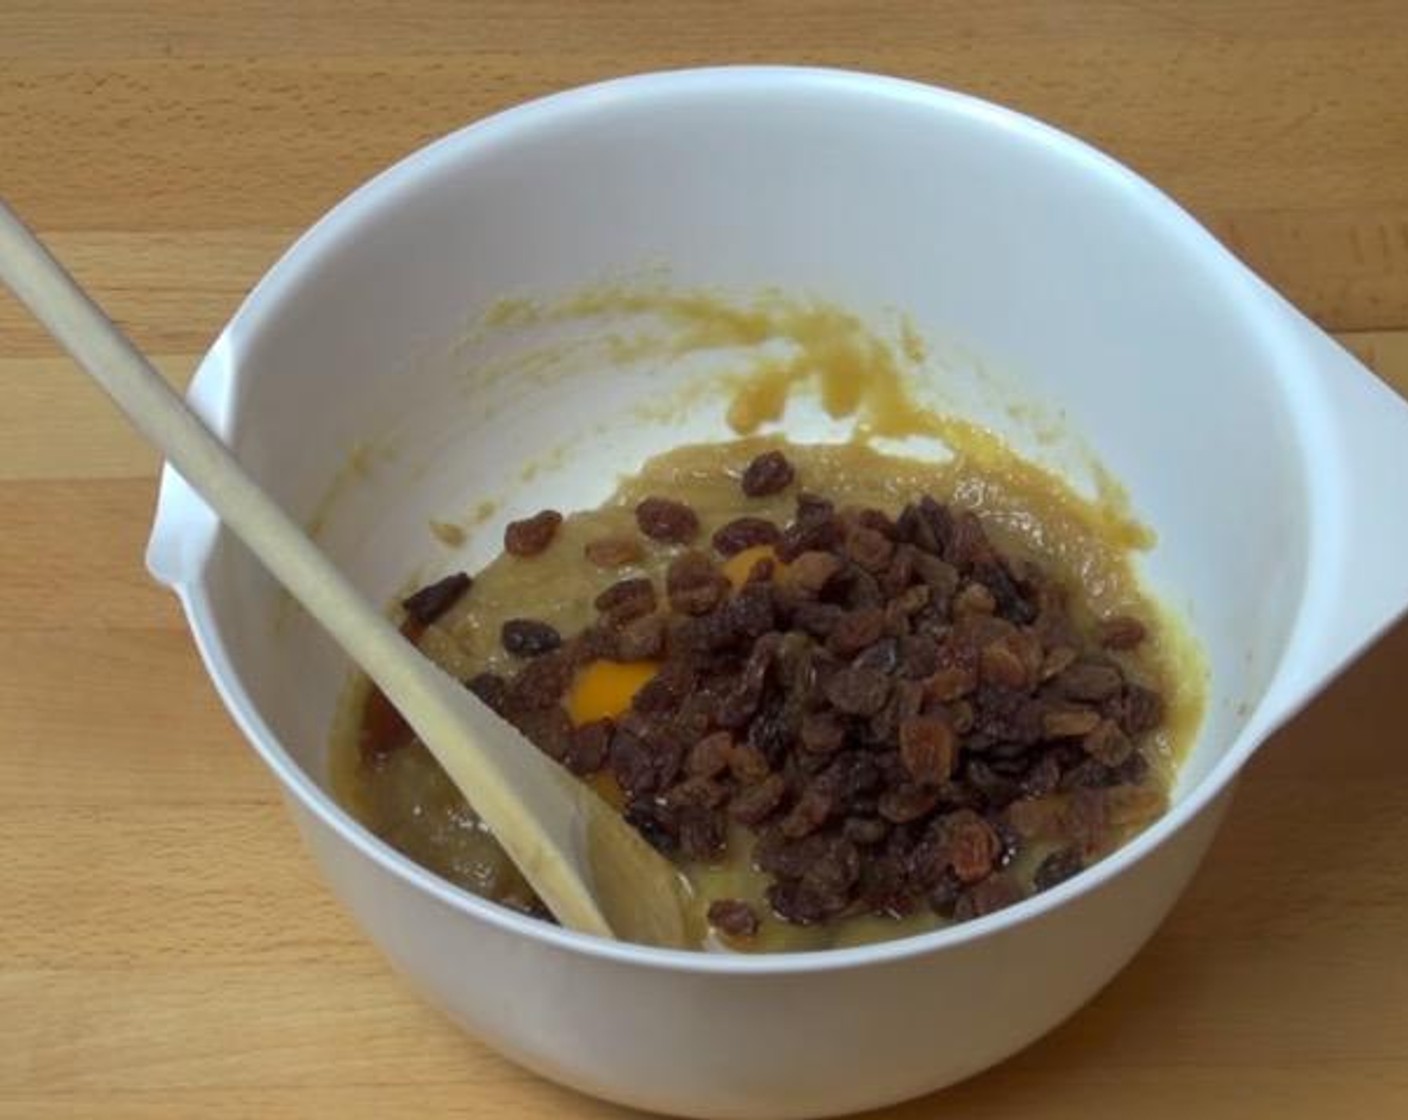 step 2 Add Vanilla Extract (1 tsp), Egg (1) and Sultanas (1/2 cup). Mix until combined.